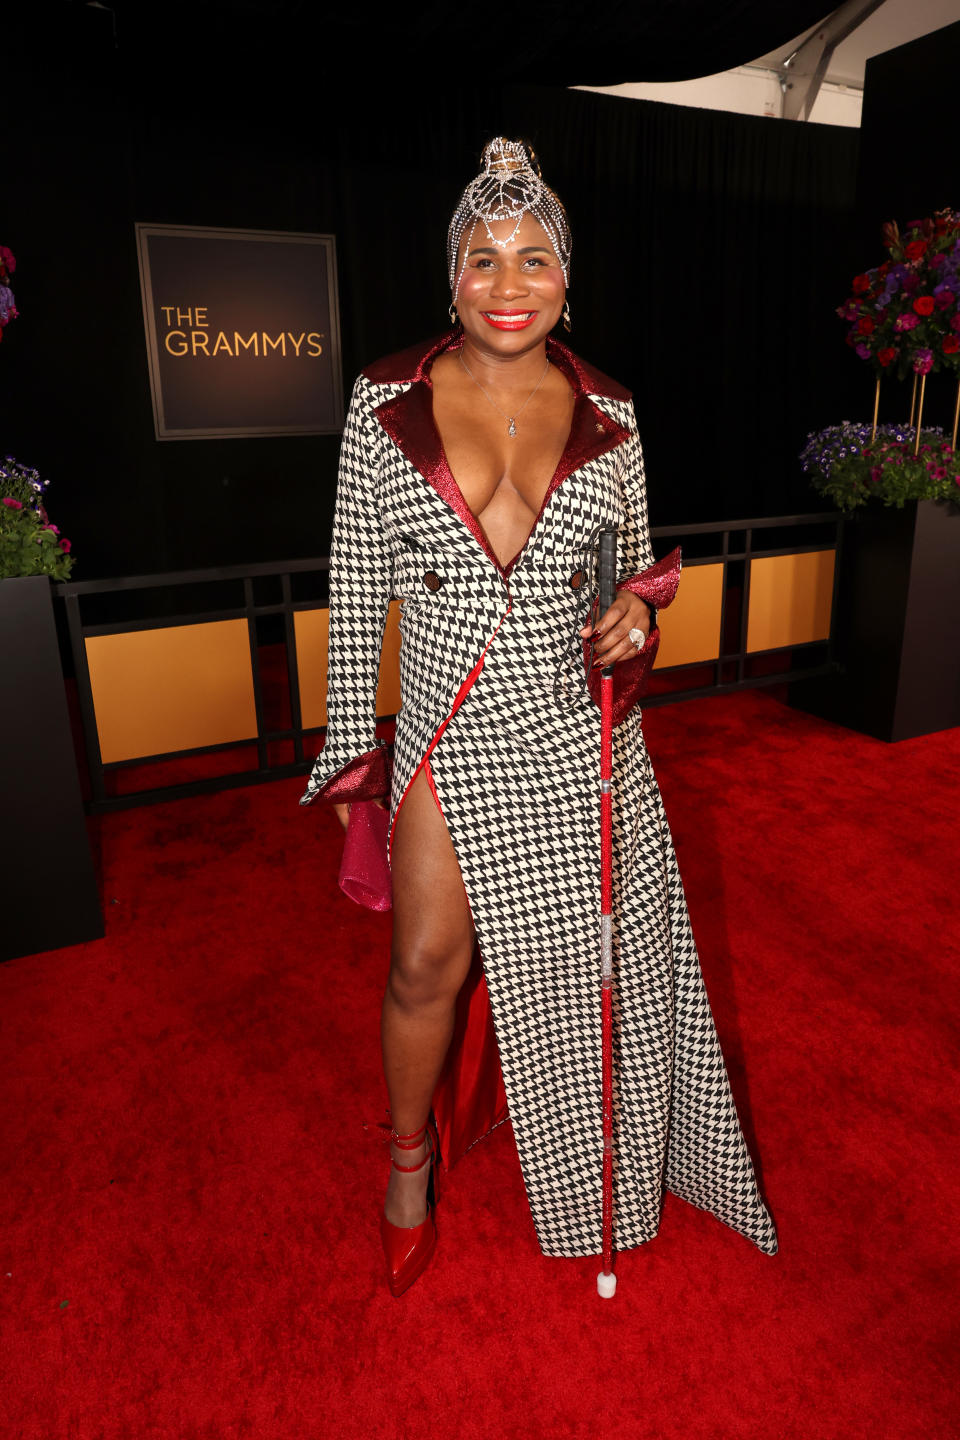 LOS ANGELES, CALIFORNIA - FEBRUARY 04: Lachi attends the 66th GRAMMY Awards at Crypto.com Arena on February 04, 2024 in Los Angeles, California. (Photo by Johnny Nunez/Getty Images for The Recording Academy)